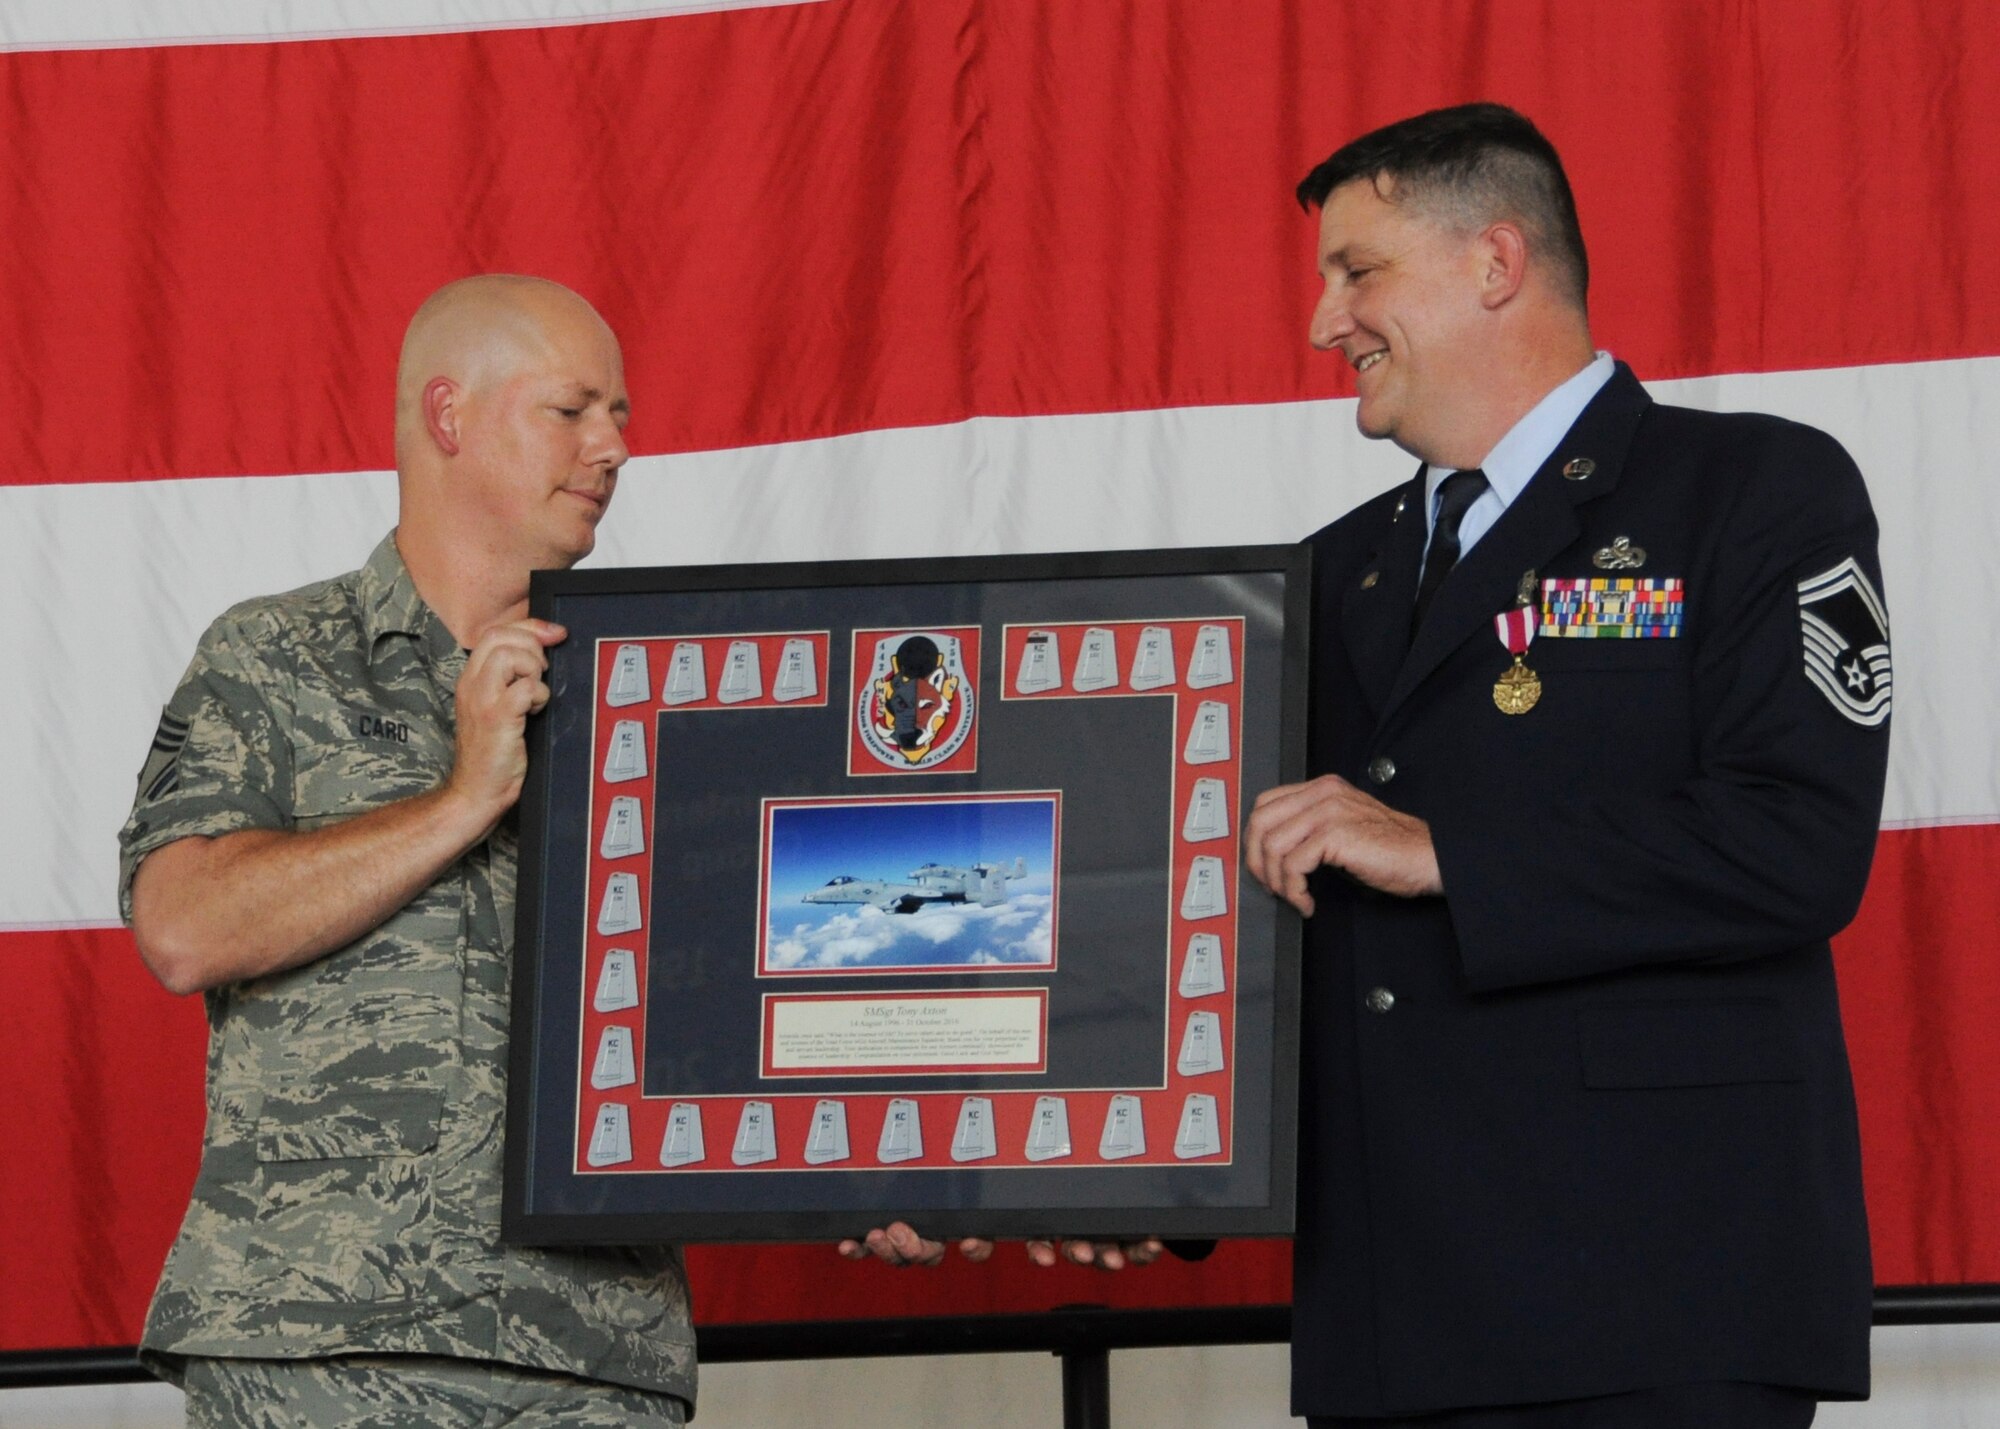 Chief Master Sgt. Brian Card, 442nd Aircraft Maintenance Squadron Weapons Flight Chief, presents a memento to Senior Master Sgt. Anthony Axton, 442nd AMXS Accessory Flight Chief, during Axton's retirement ceremony at Whiteman Air Force Base, Mo., Oct. 16, 2016. Axton was selected as the accessory flight chief in 2013 and is continuing his career as a Sexual Assault Prevention and Response victim advocate for the 509th Bomb Wing at Whiteman. (U.S. Air Force photo/Senior Airman Missy Sterling)